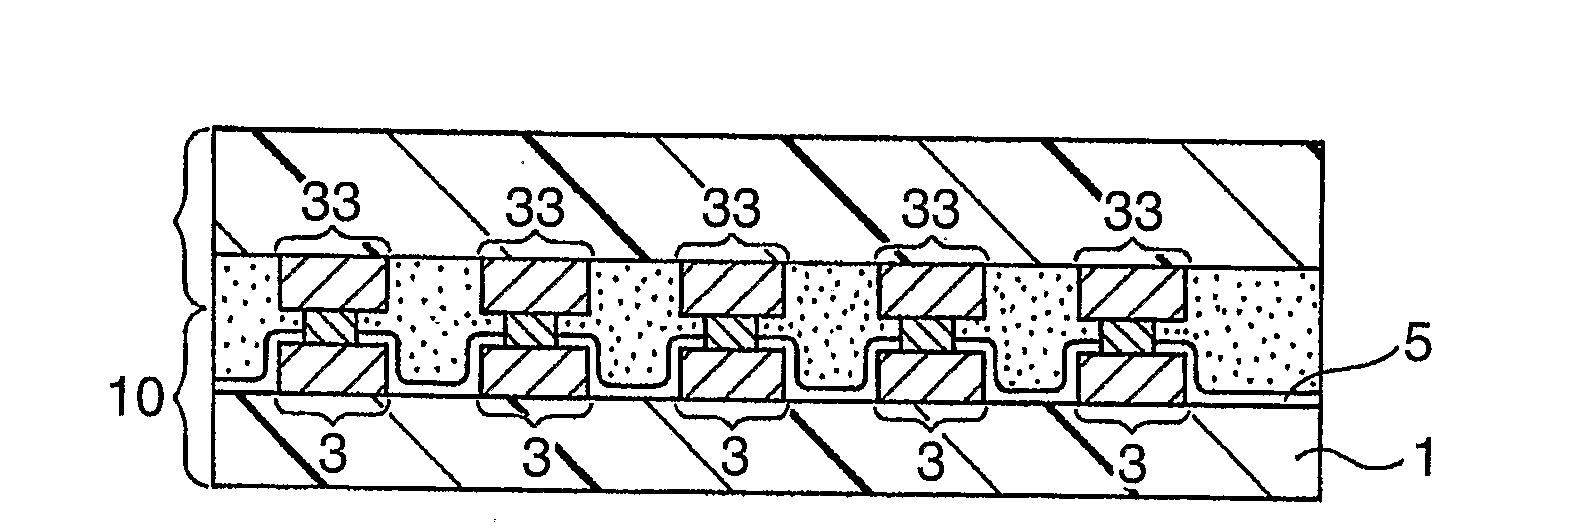 Method for Connecting Printed Circuit Board